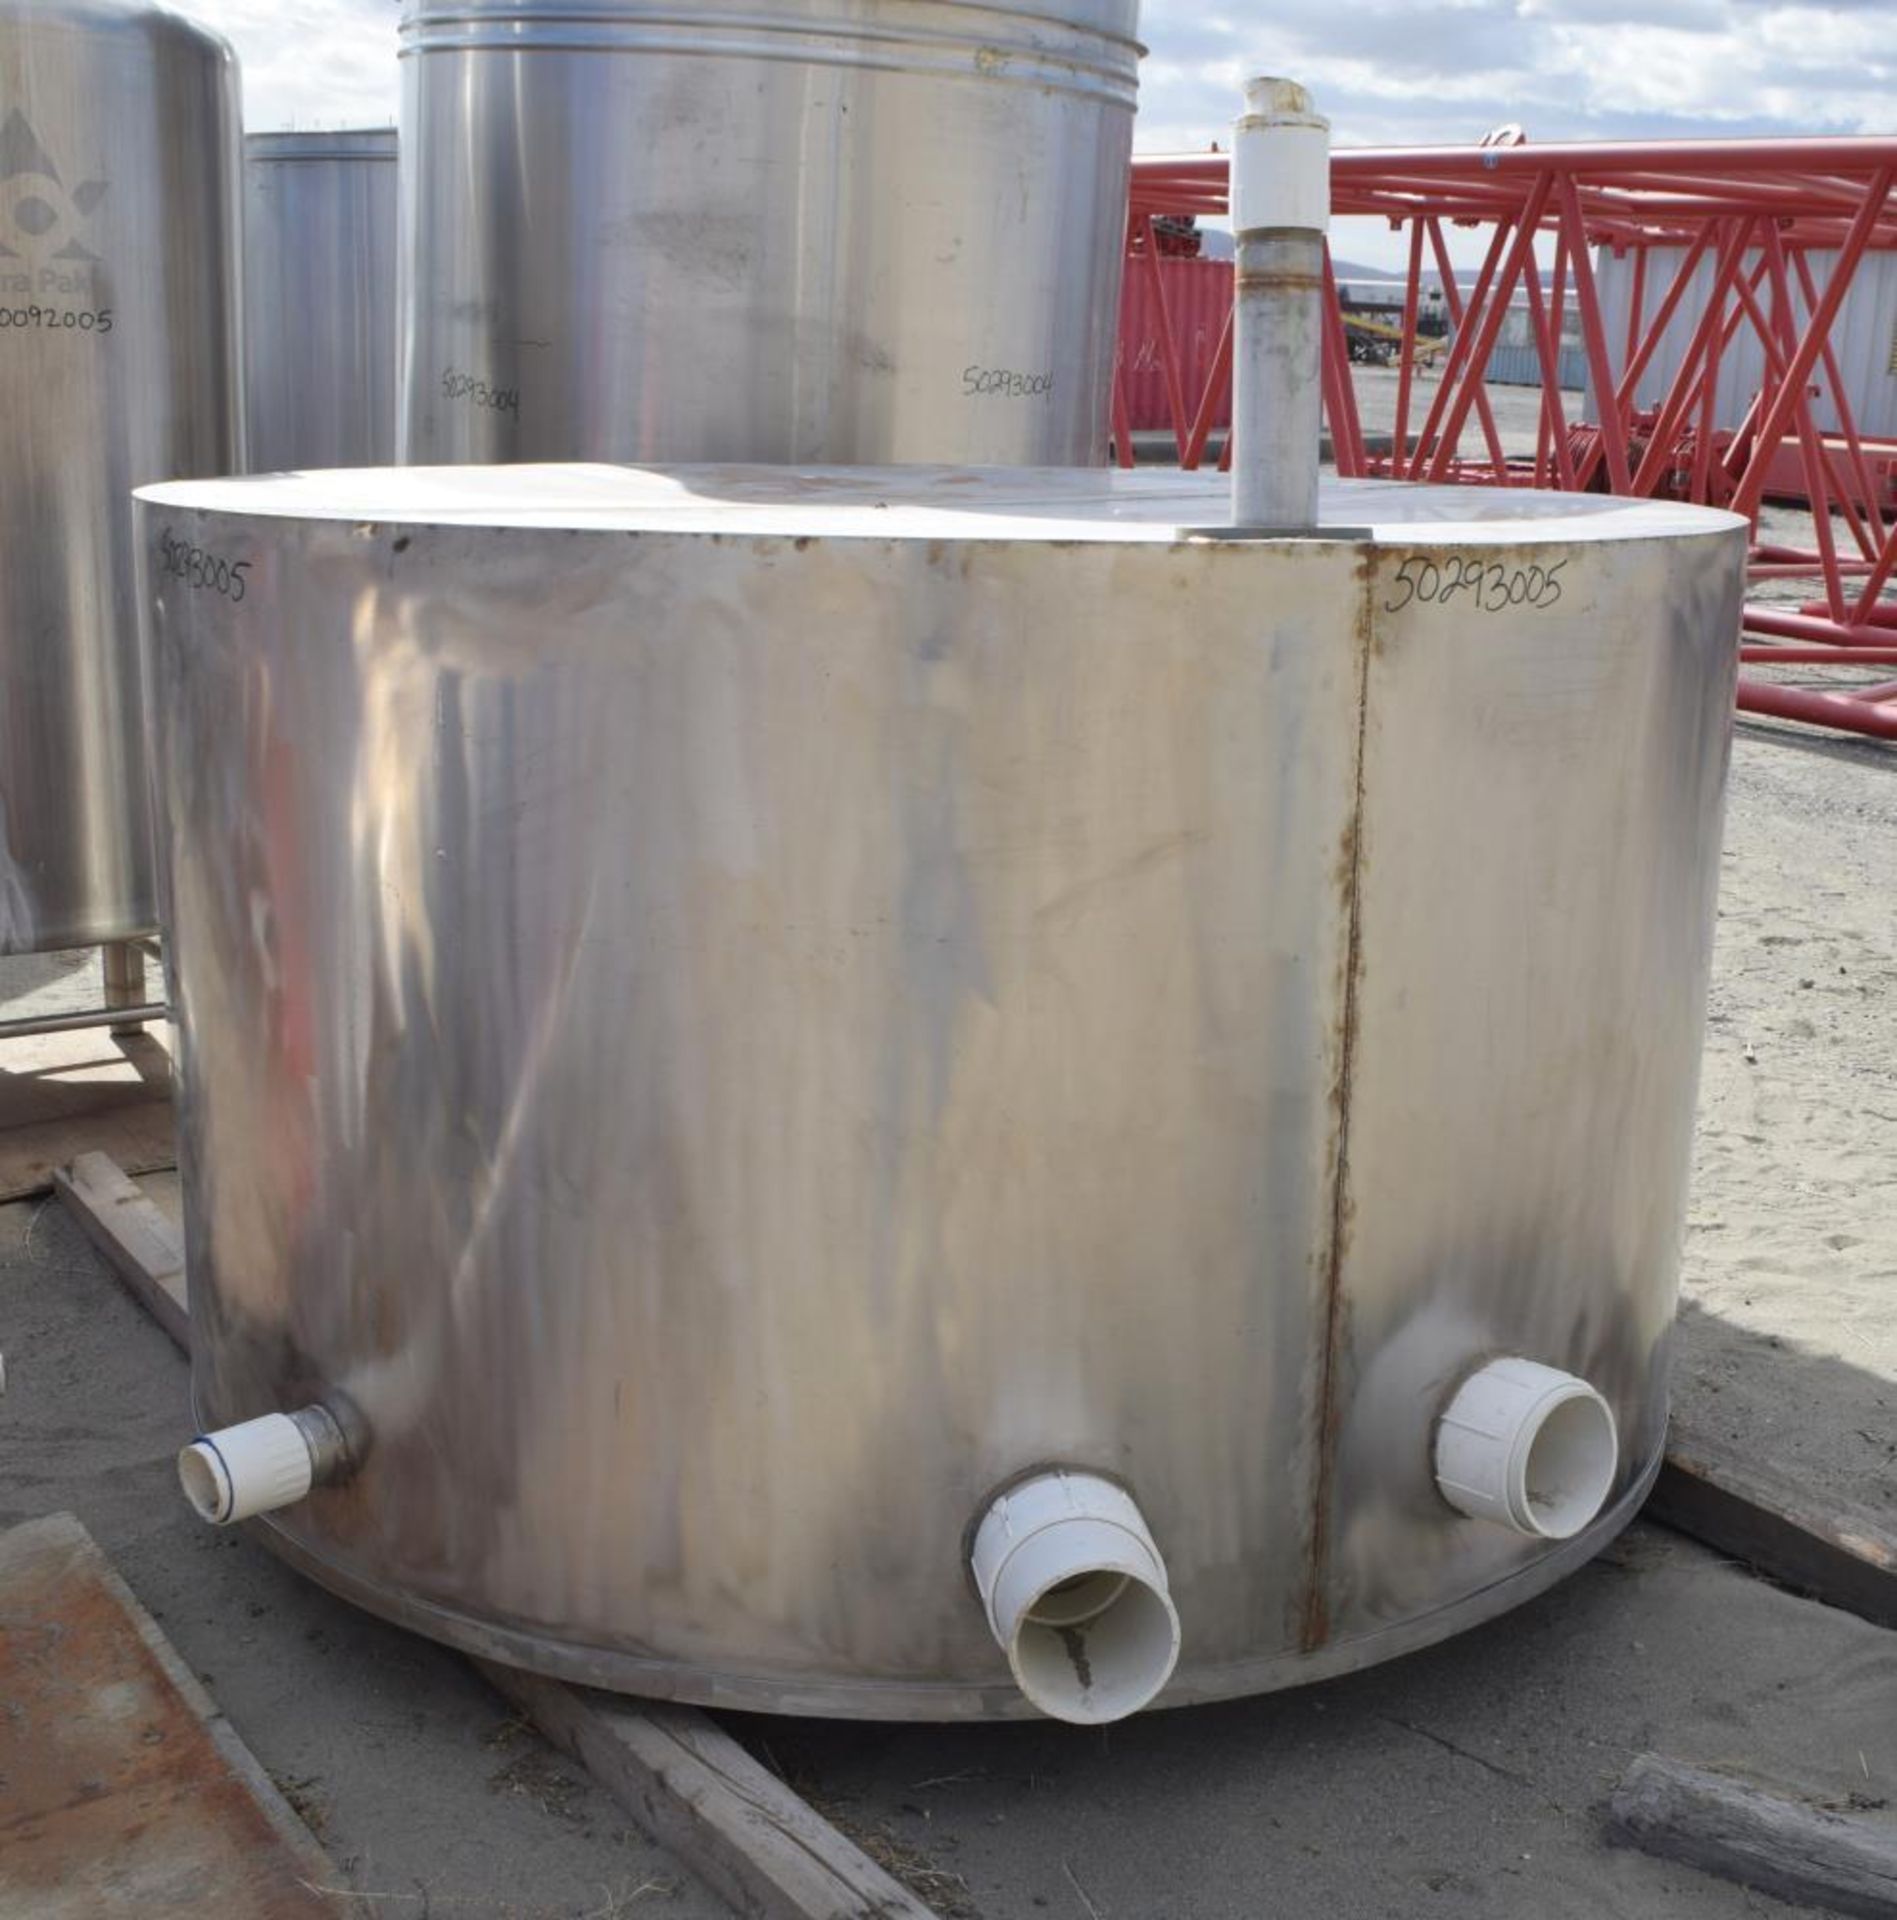 Used- Tank, Approximate 1,000 Gallon, Stainless Steel. Approximate 82" diameter x 48" straight side, - Image 3 of 6